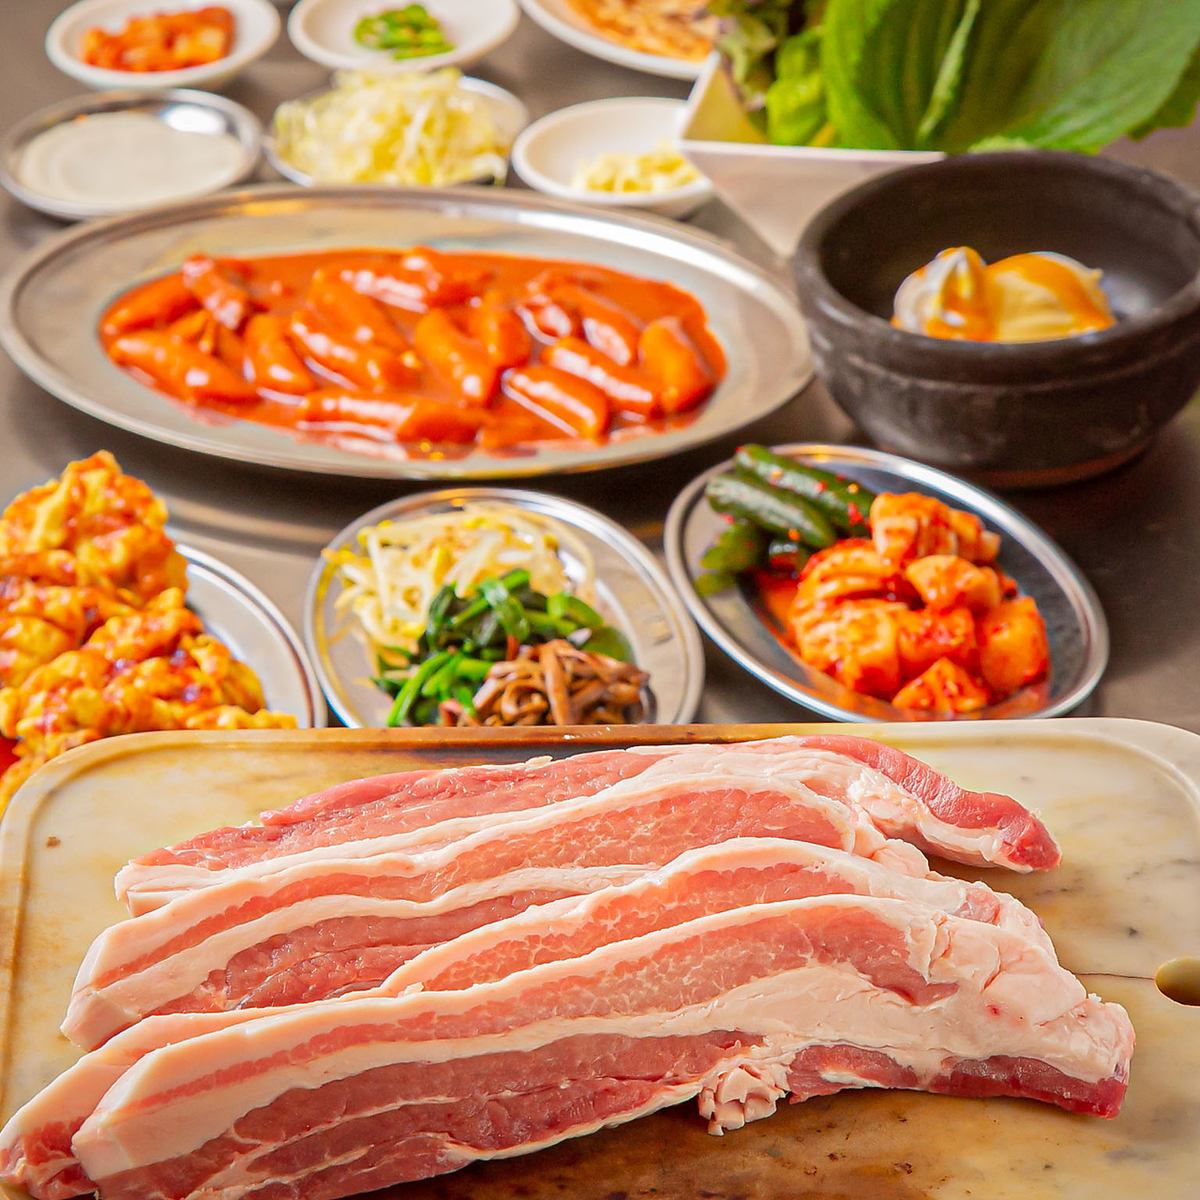 Our signature dish, raw samgyeopsal, is even more delicious with condiments and leafy vegetables!